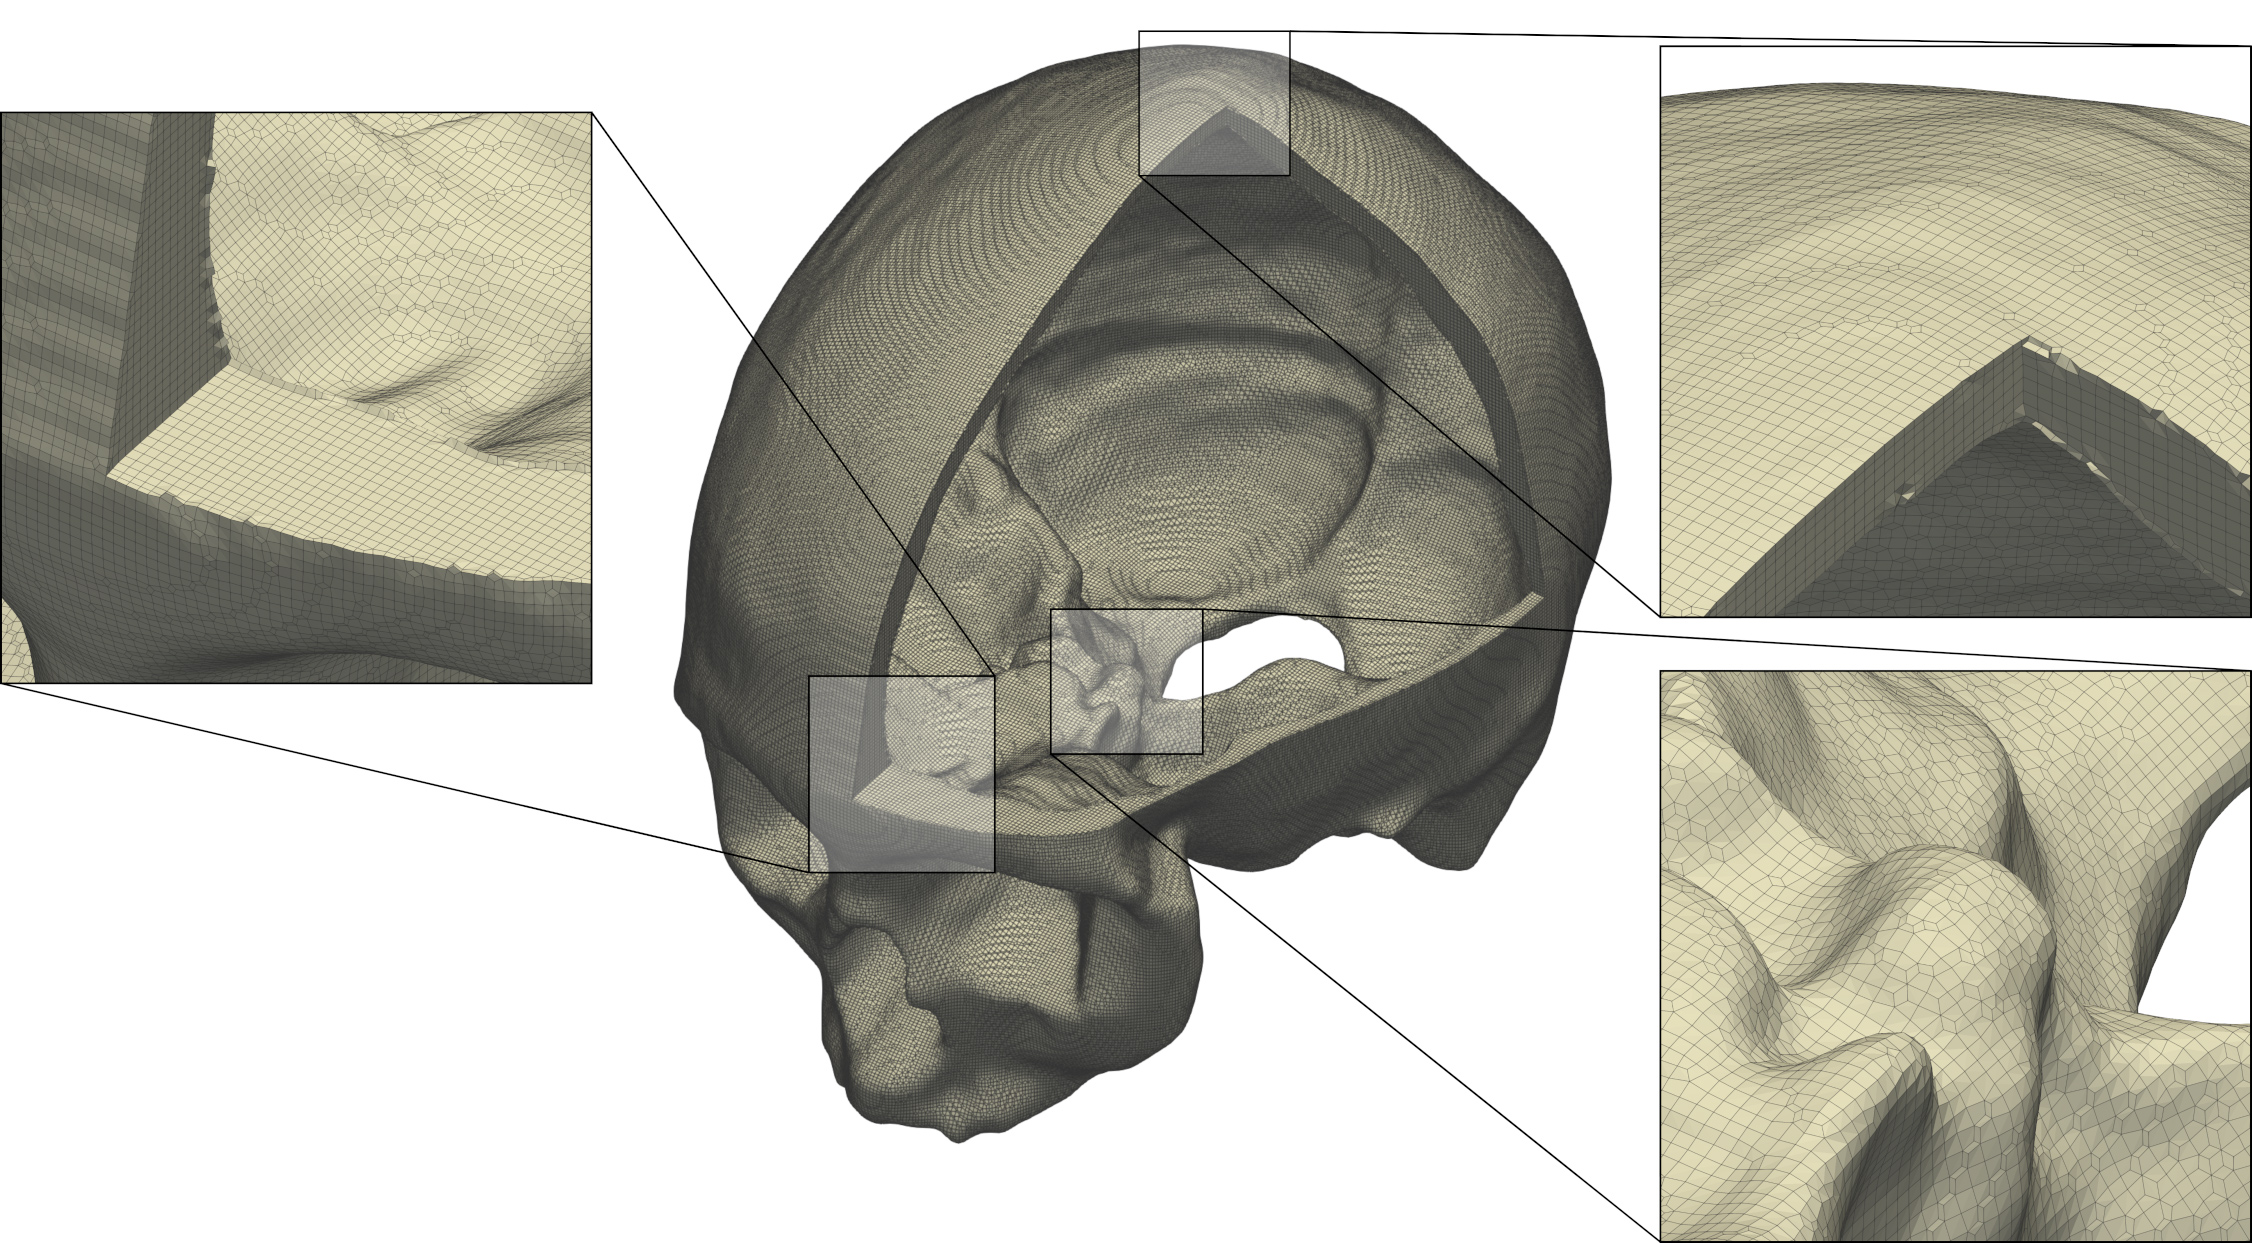 A hexahedral finite-element mesh of the skull with different detailed views.